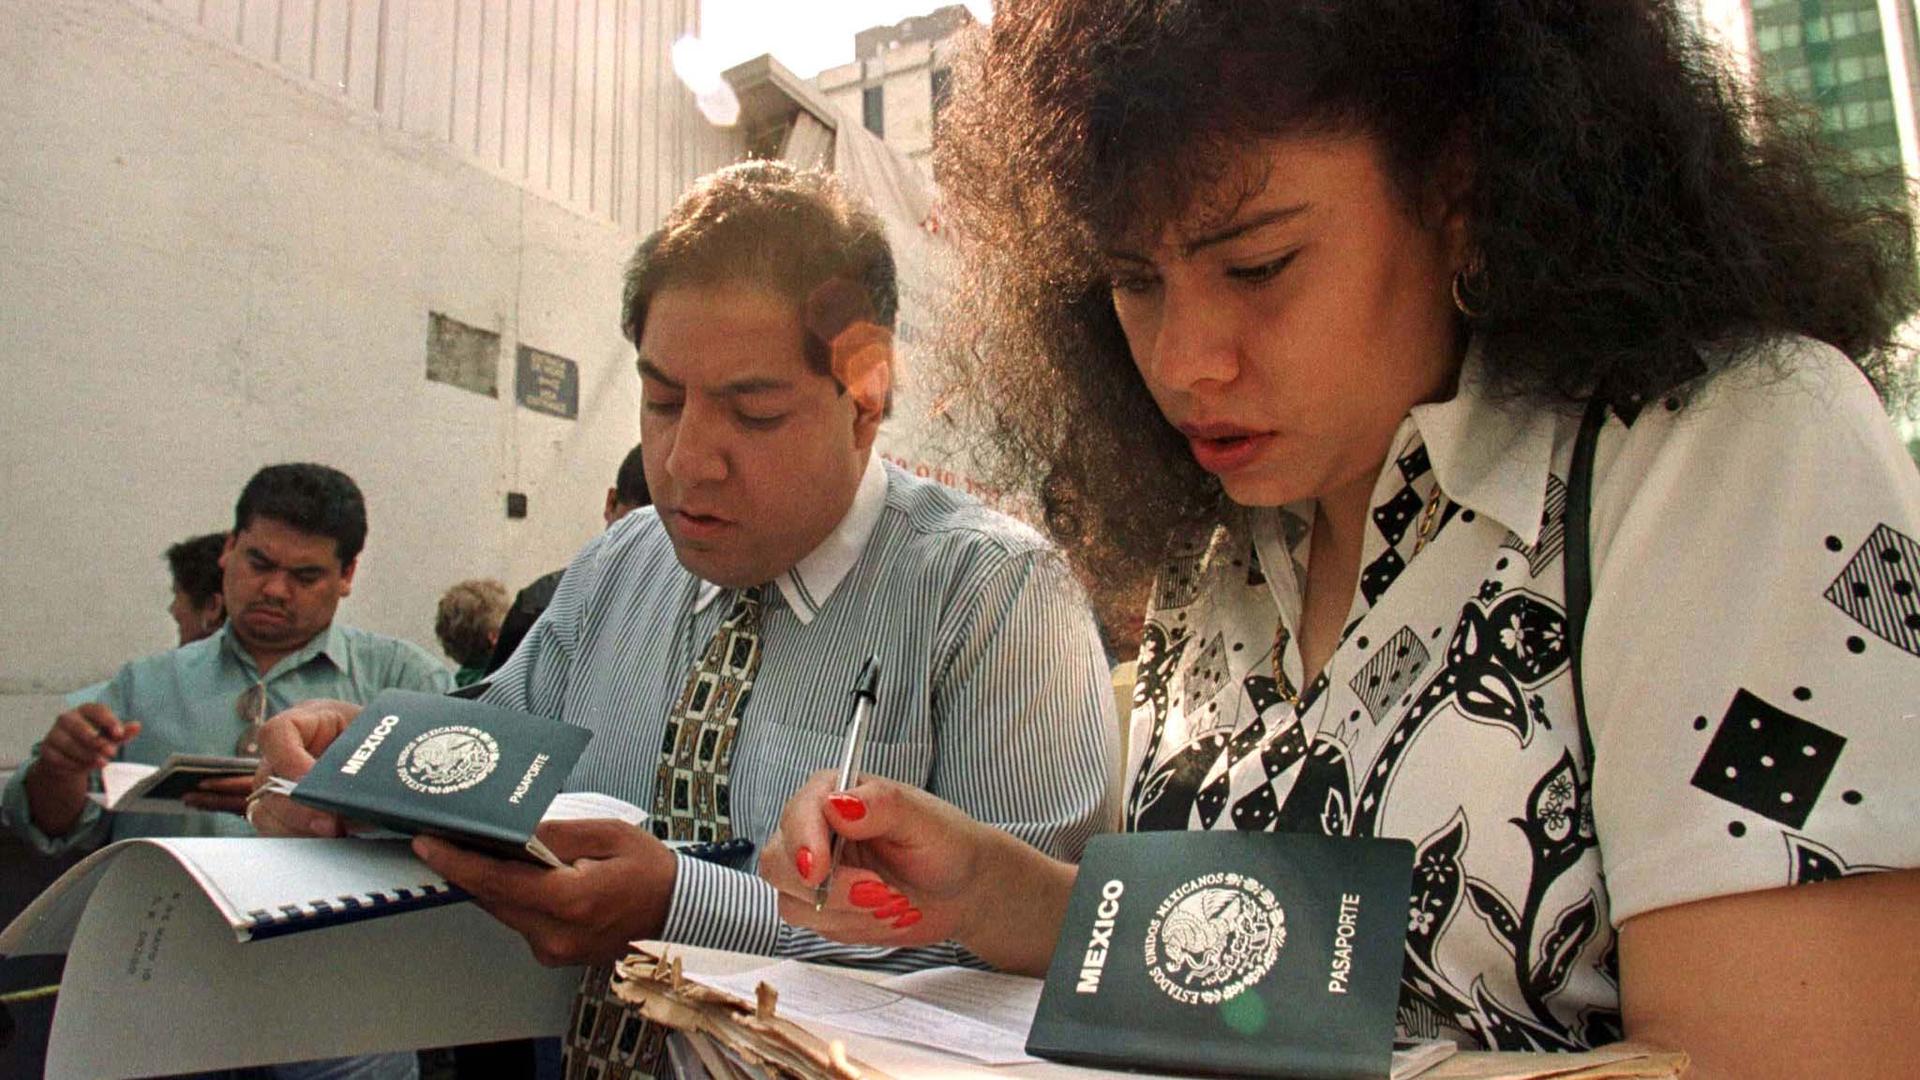 A man and a woman fill out forms with Mexican passports in the frame